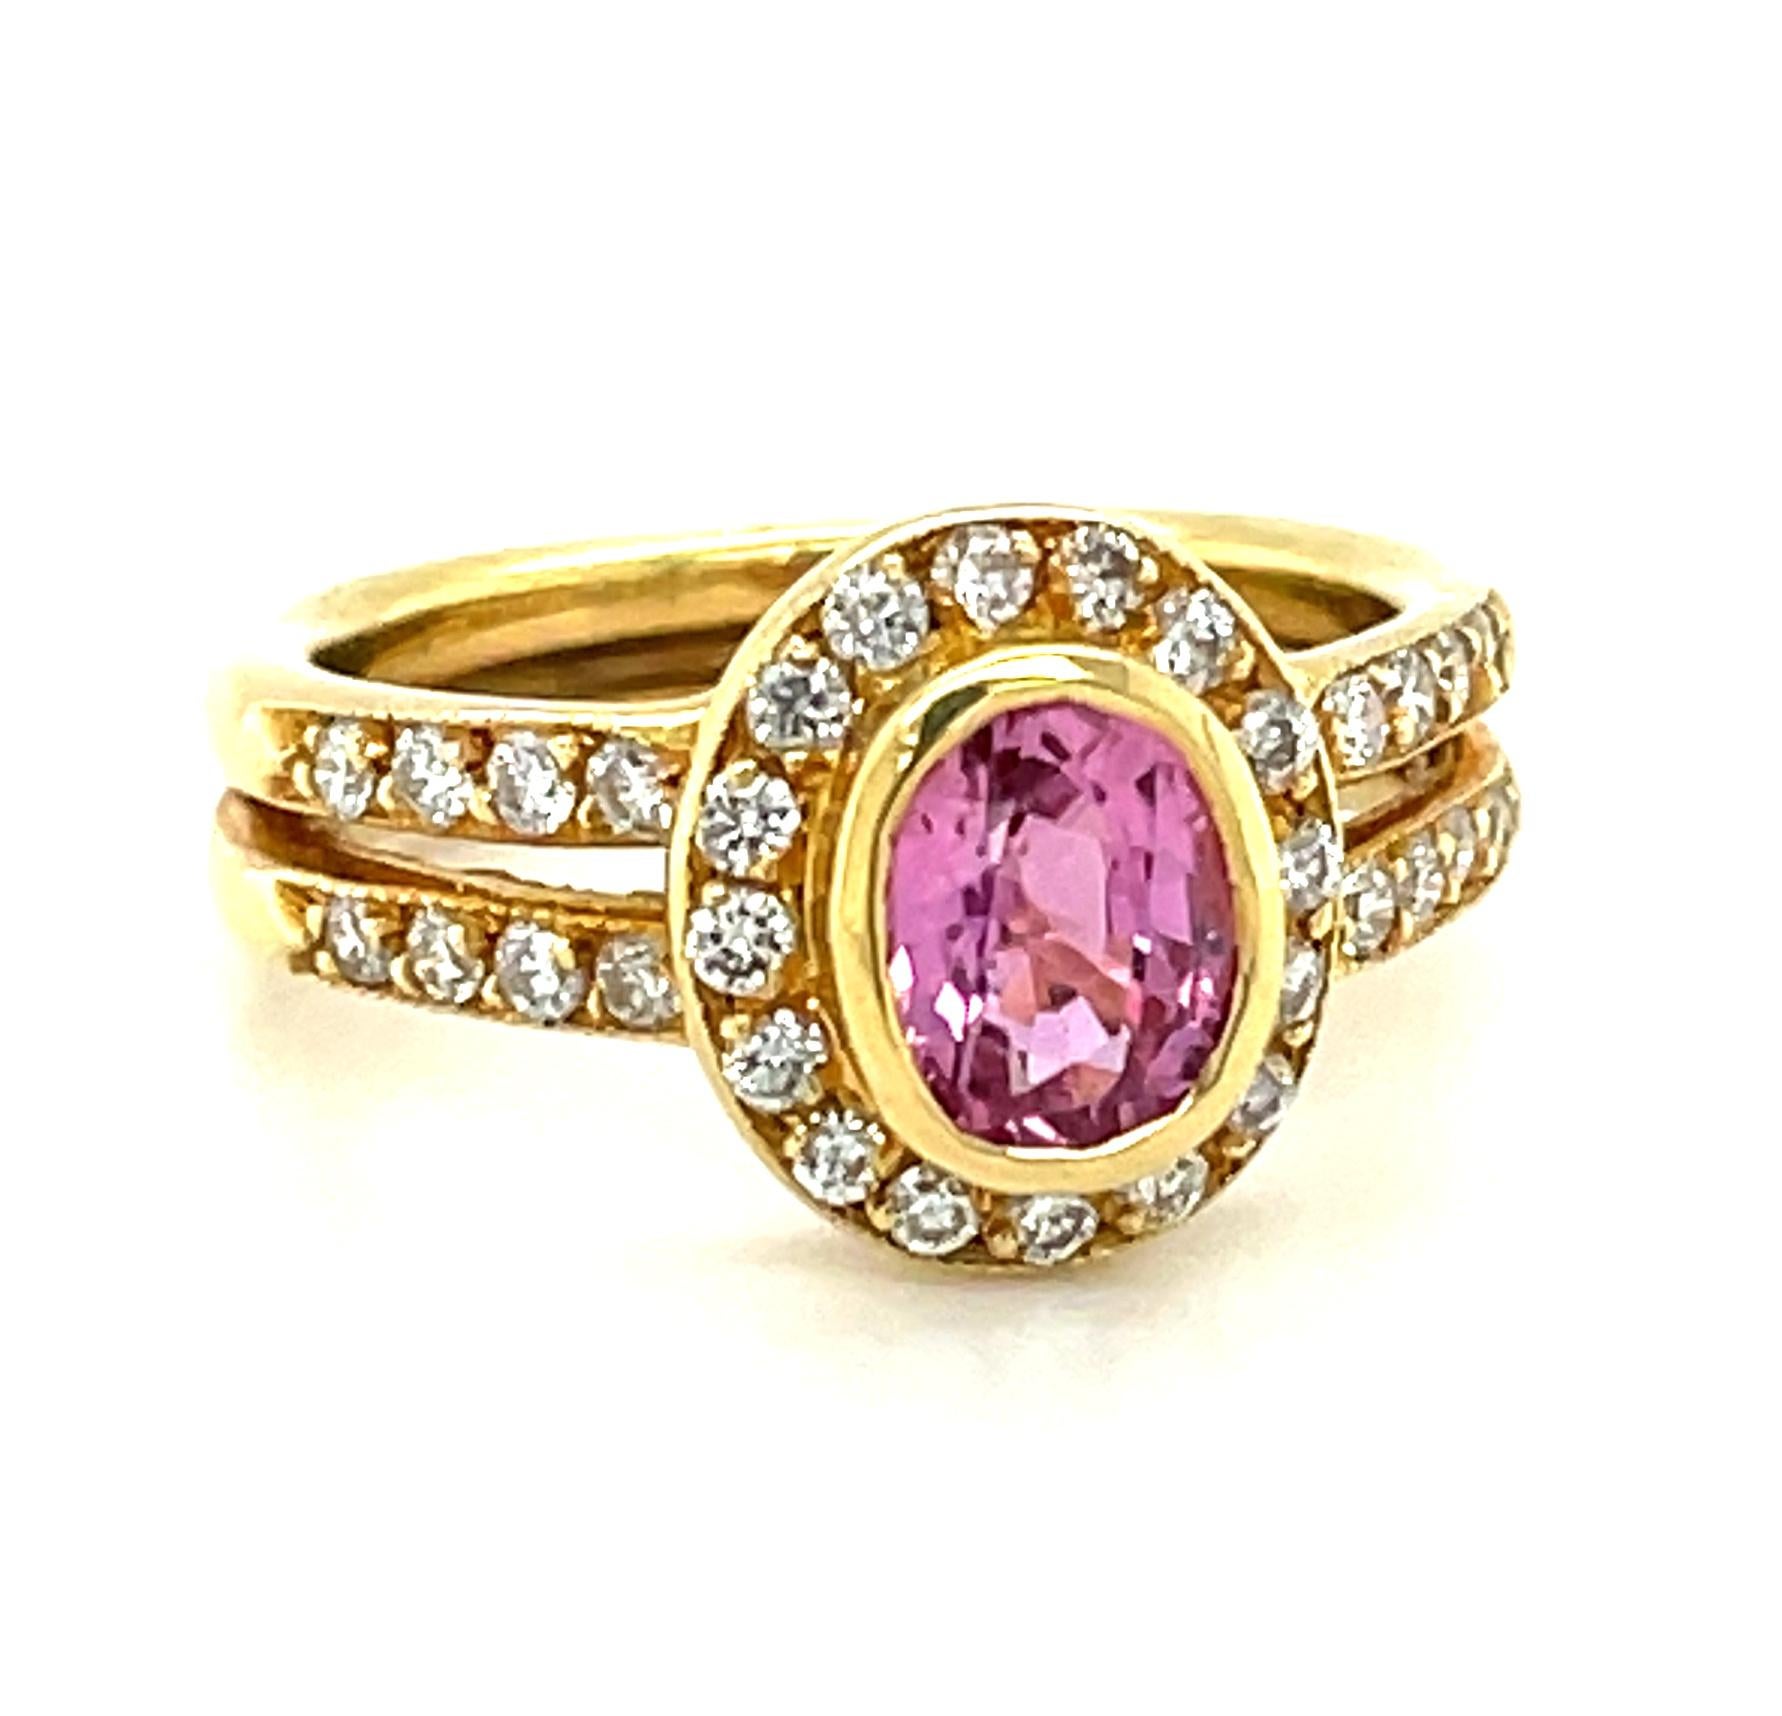 This pretty ring features a vibrant pink sapphire and sparkling diamonds in an 18k yellow gold setting that is perfect for everyday wear! The pink sapphire has been bezel set and framed with a halo of white diamonds, with two rows of additional